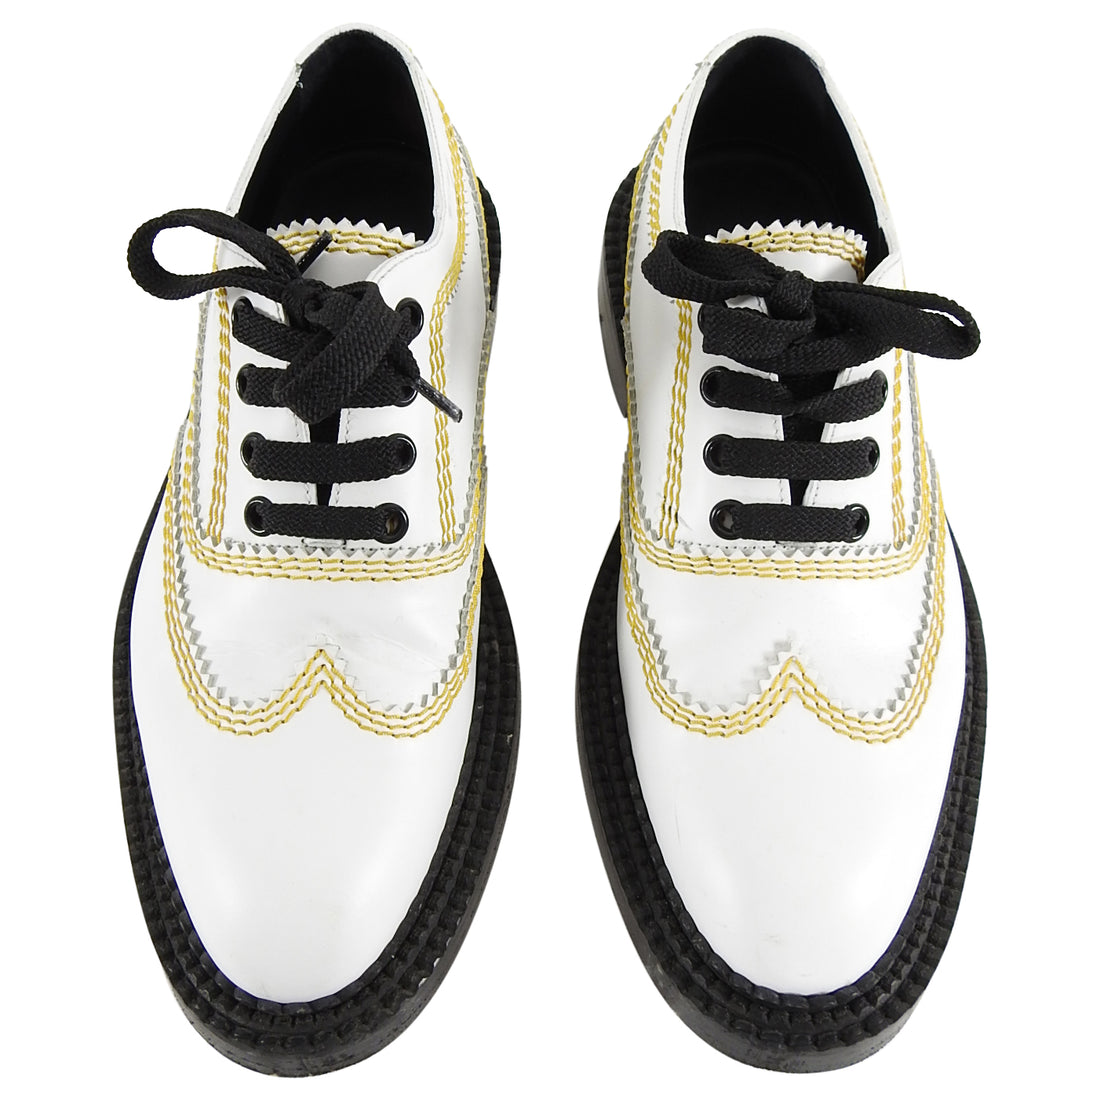 Burberry London White Oxford Lace up with Yellow Topstitching - 6.5